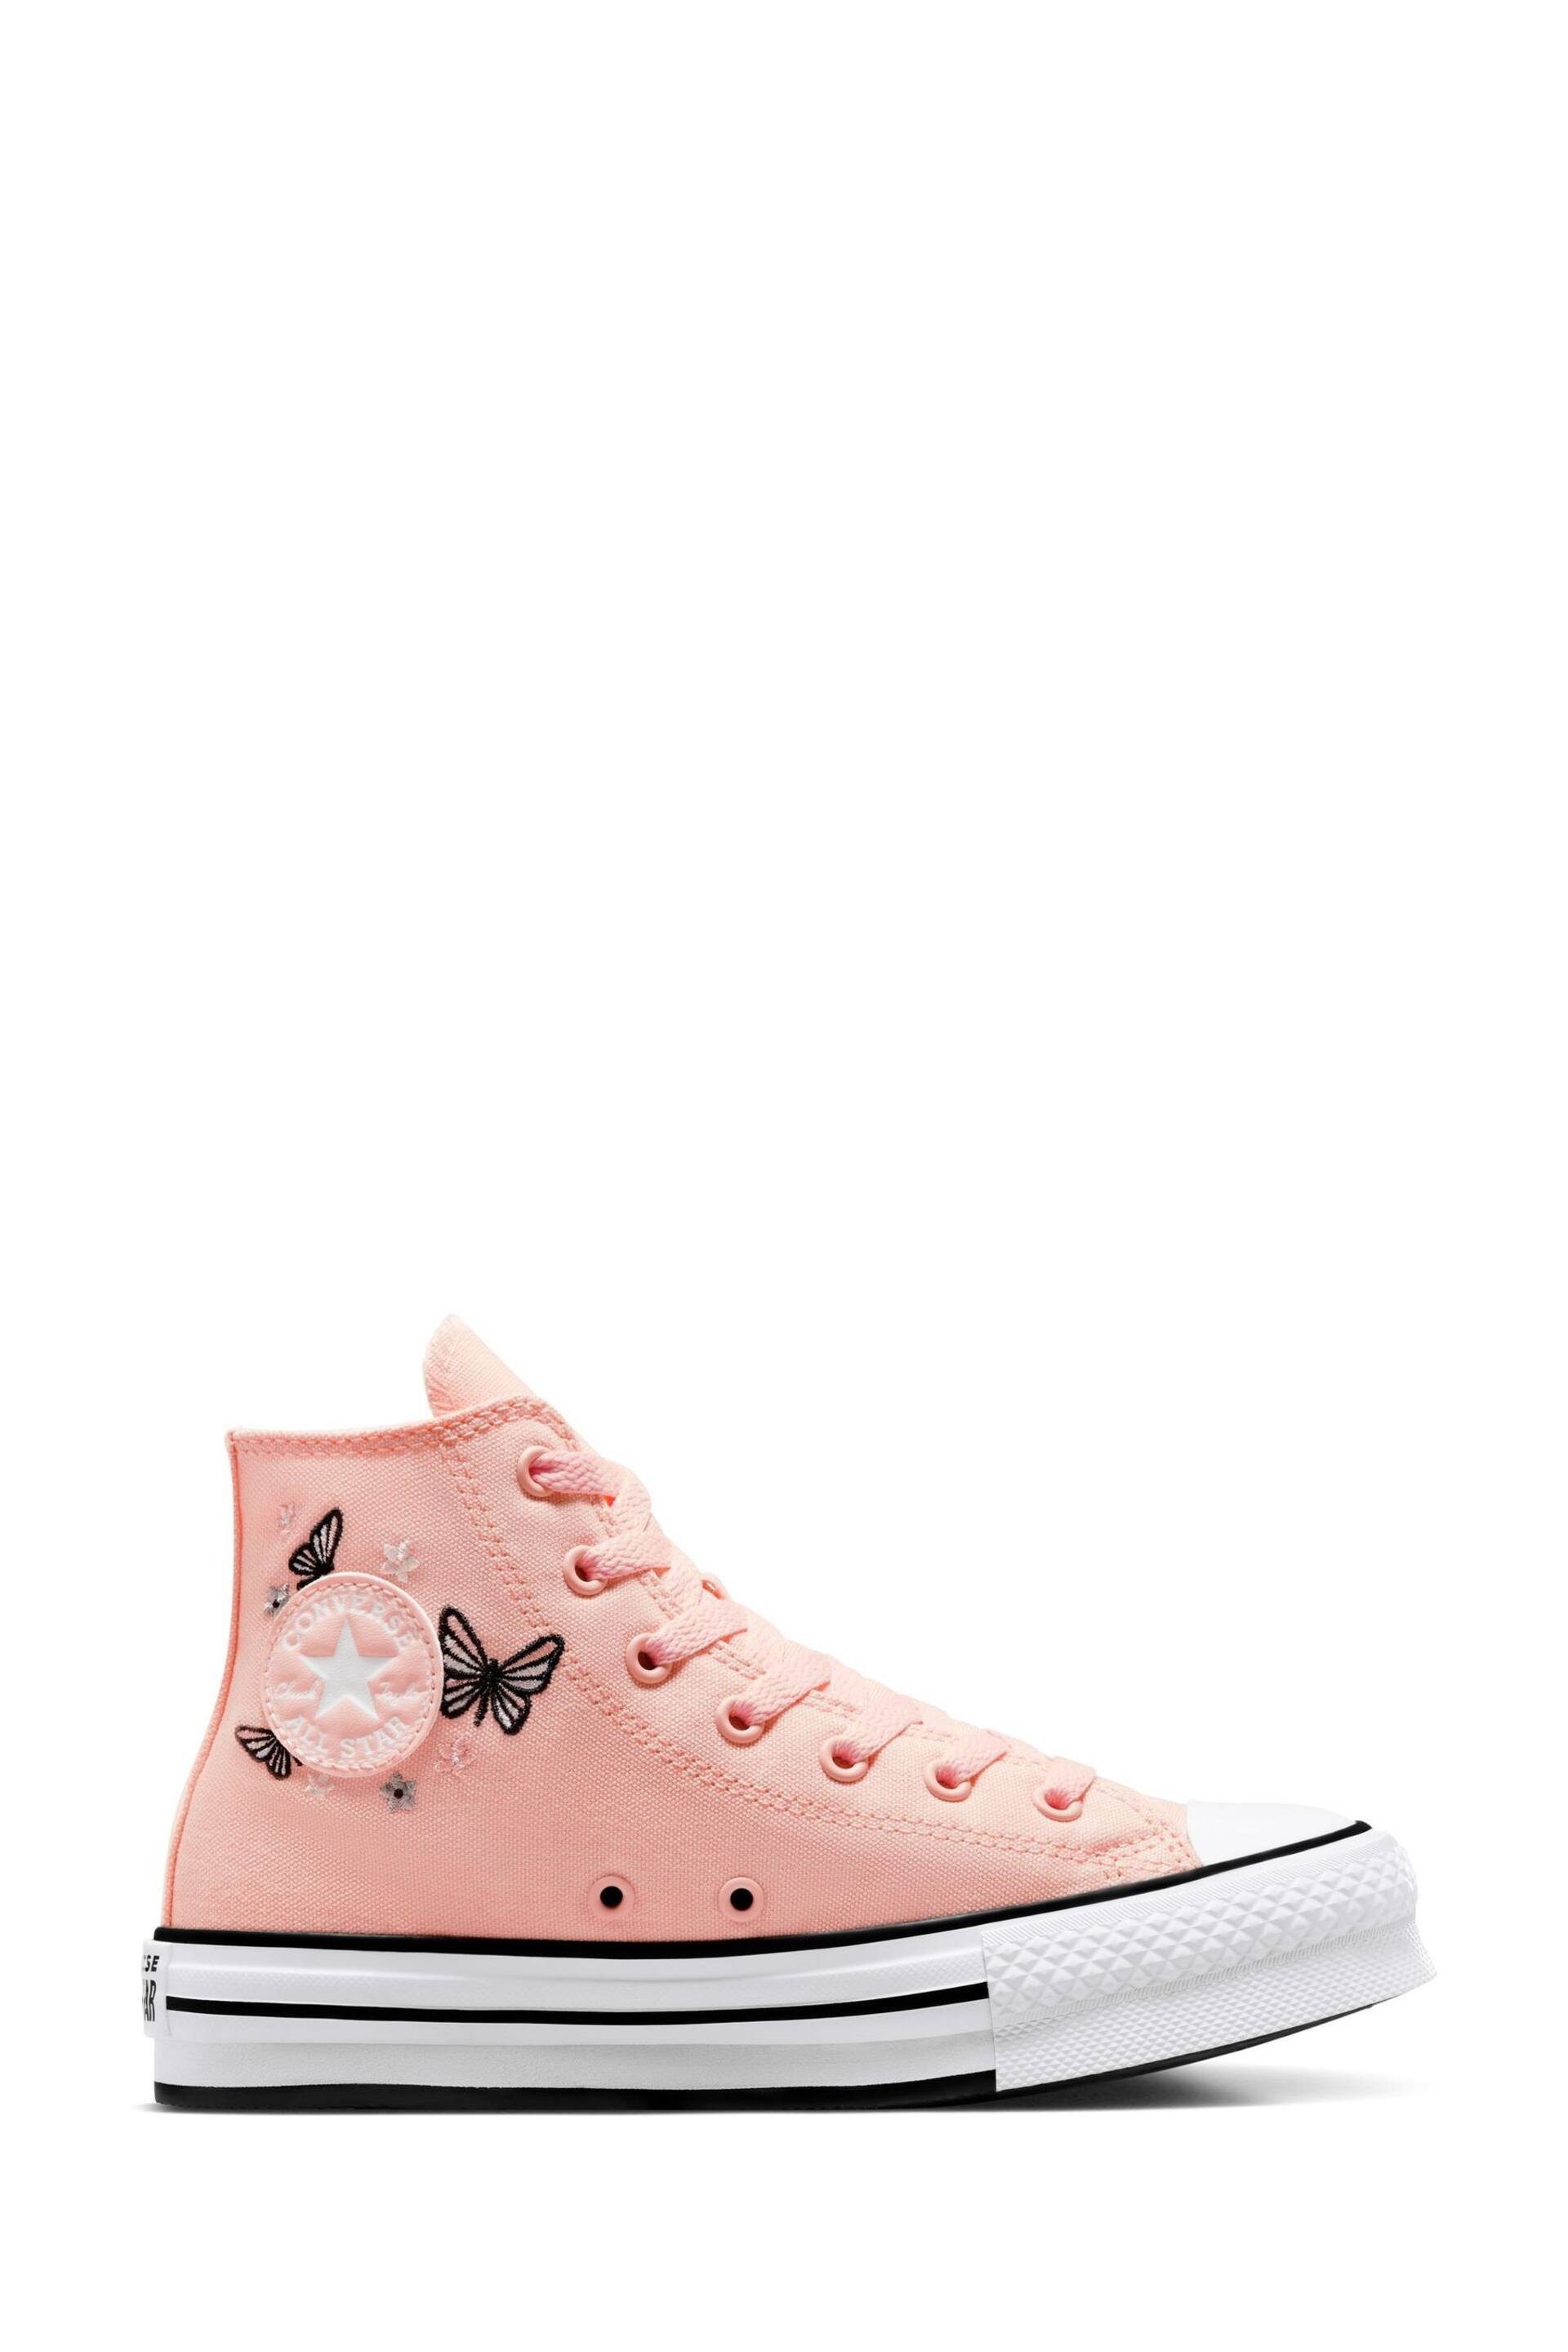 Converse Pink Butterfly Embroidered EVA Lift Youth Trainers - Image 2 of 9